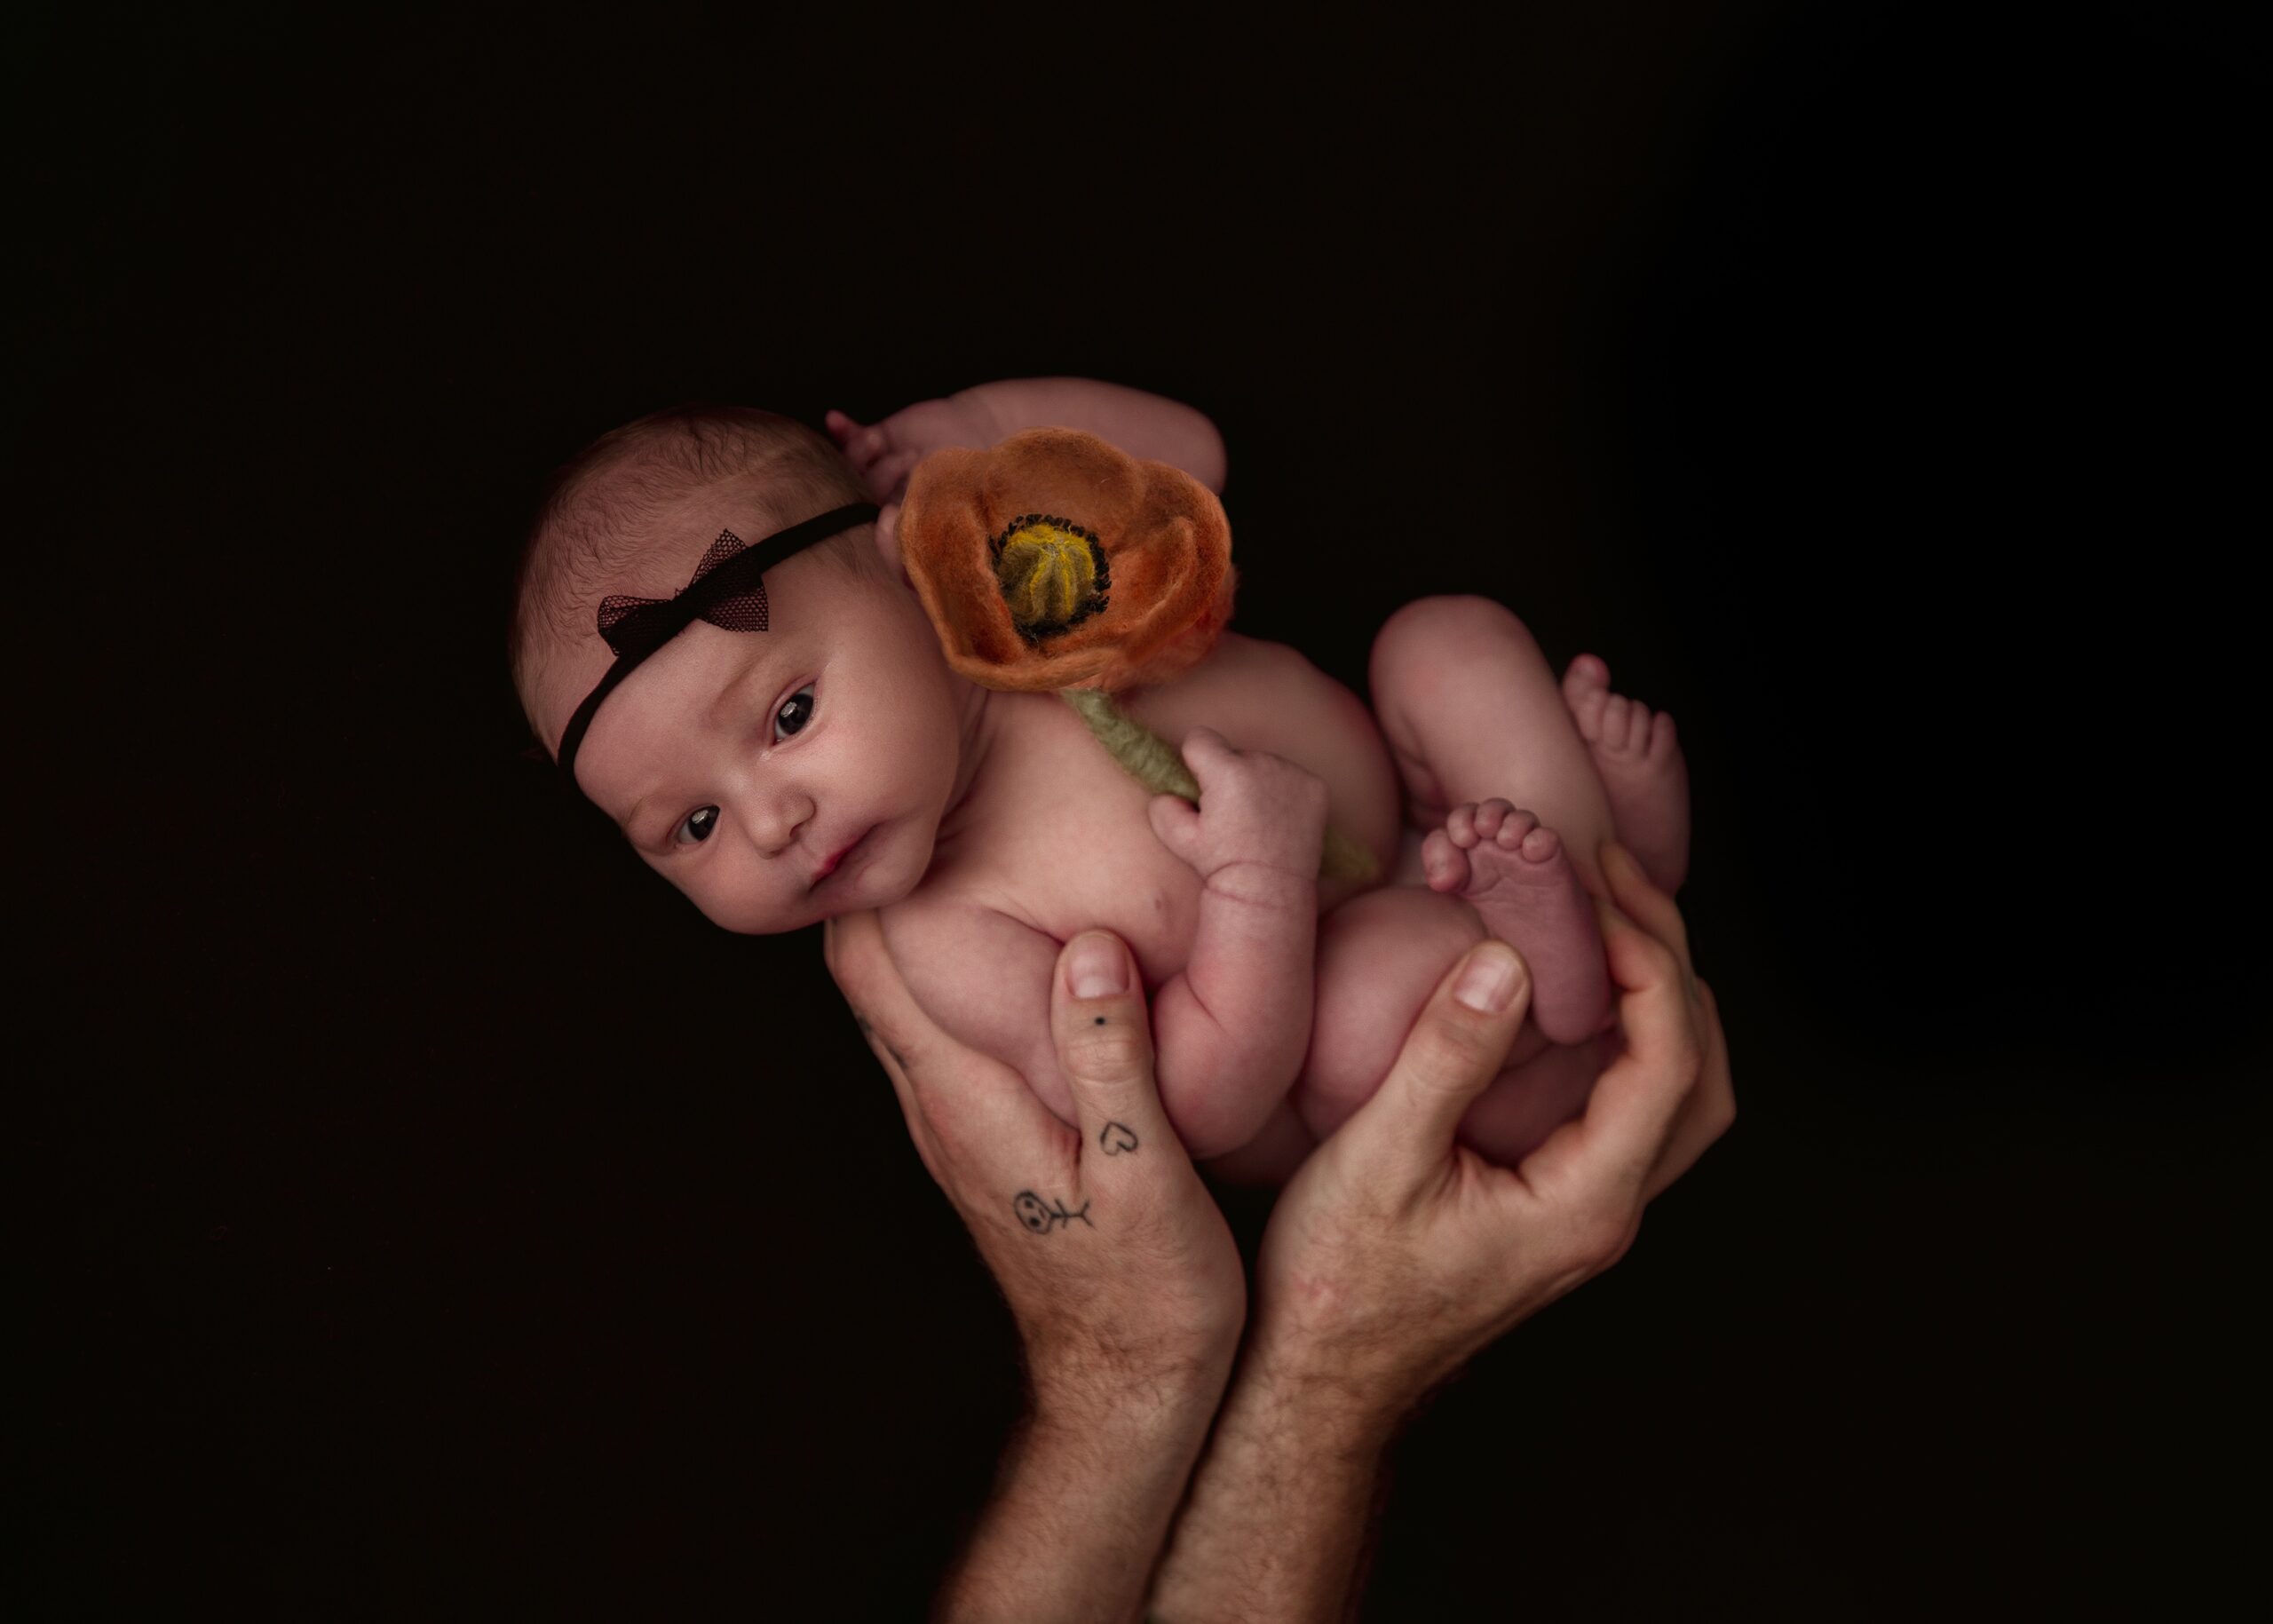 I want newborn photos taken but I am unsure if I want to be in them.